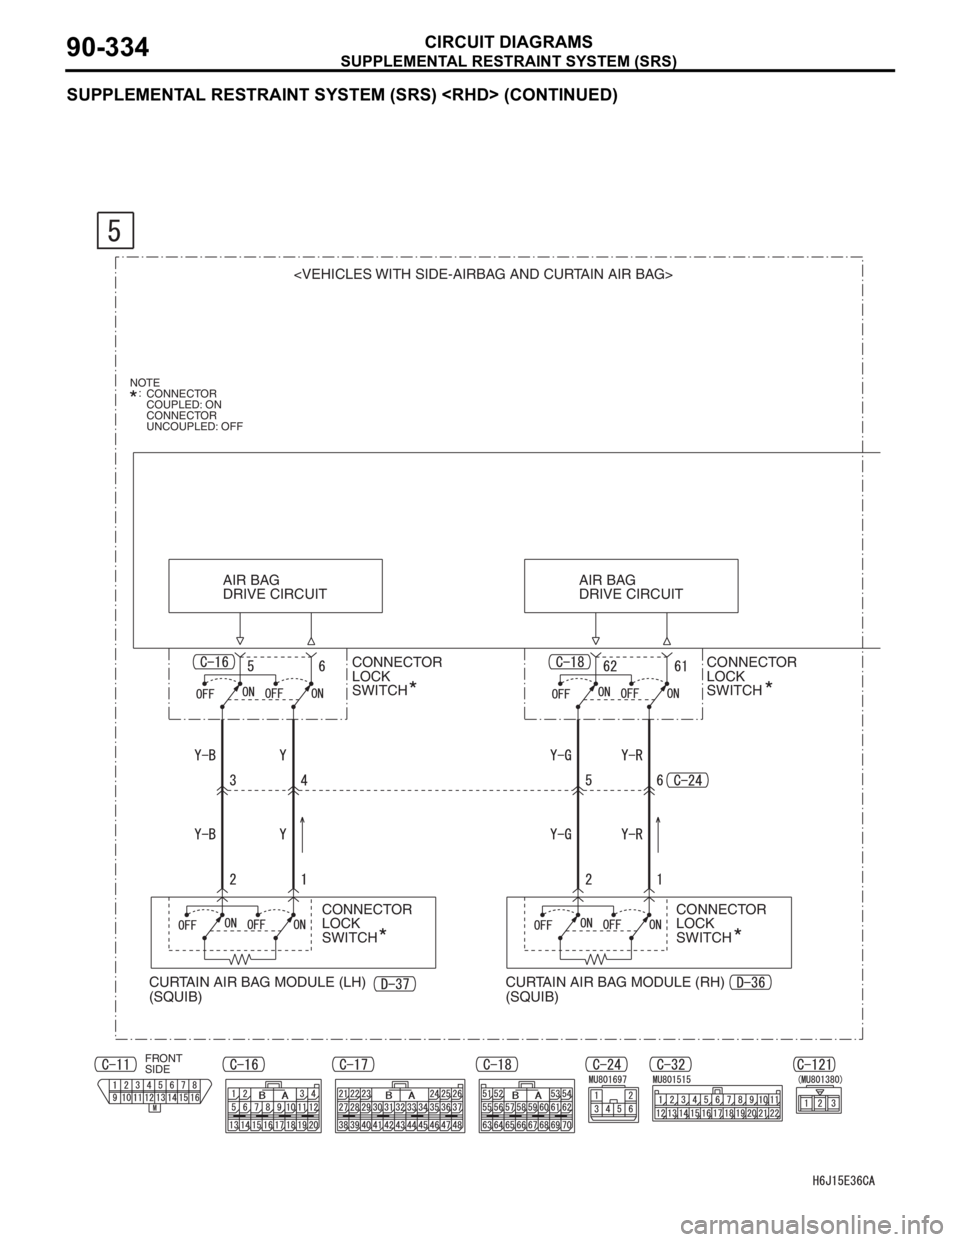 MITSUBISHI LANCER 2006  Workshop Manual SUPPLEMENTAL RESTRAINT SYSTEM (SRS)
CIRCUIT DIAGRAMS90-334
SUPPLEMENTAL RESTRAINT SYSTEM (SRS) <RHD> (CONTINUED)
<VEHICLES WITH SIDE-AIRBAG AND CURTAIN AIR BAG>
CONNECTOR 
LOCK 
SWITCH AIR BAG 
DRIVE 